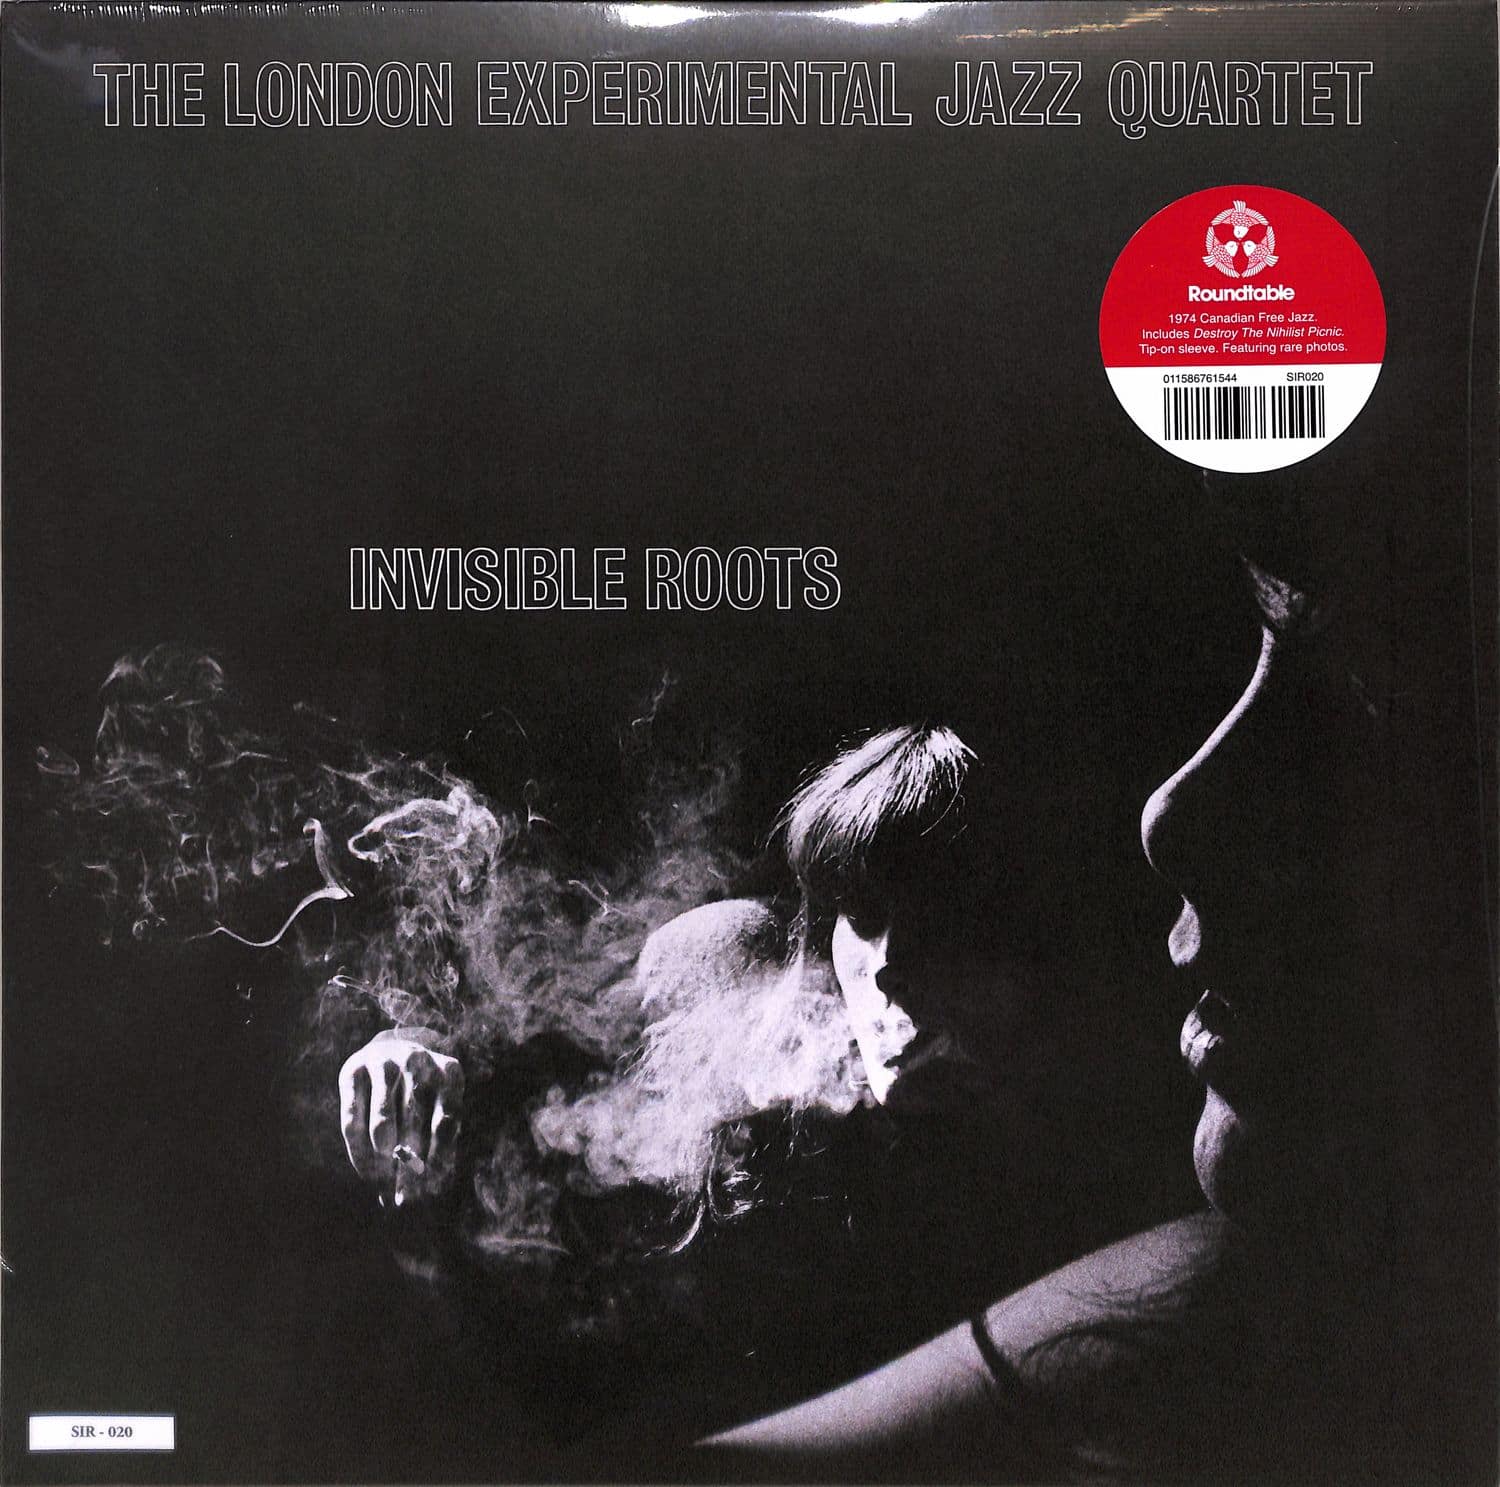 The London Experimental Jazz Quartet - INVISIBLE ROOTS 